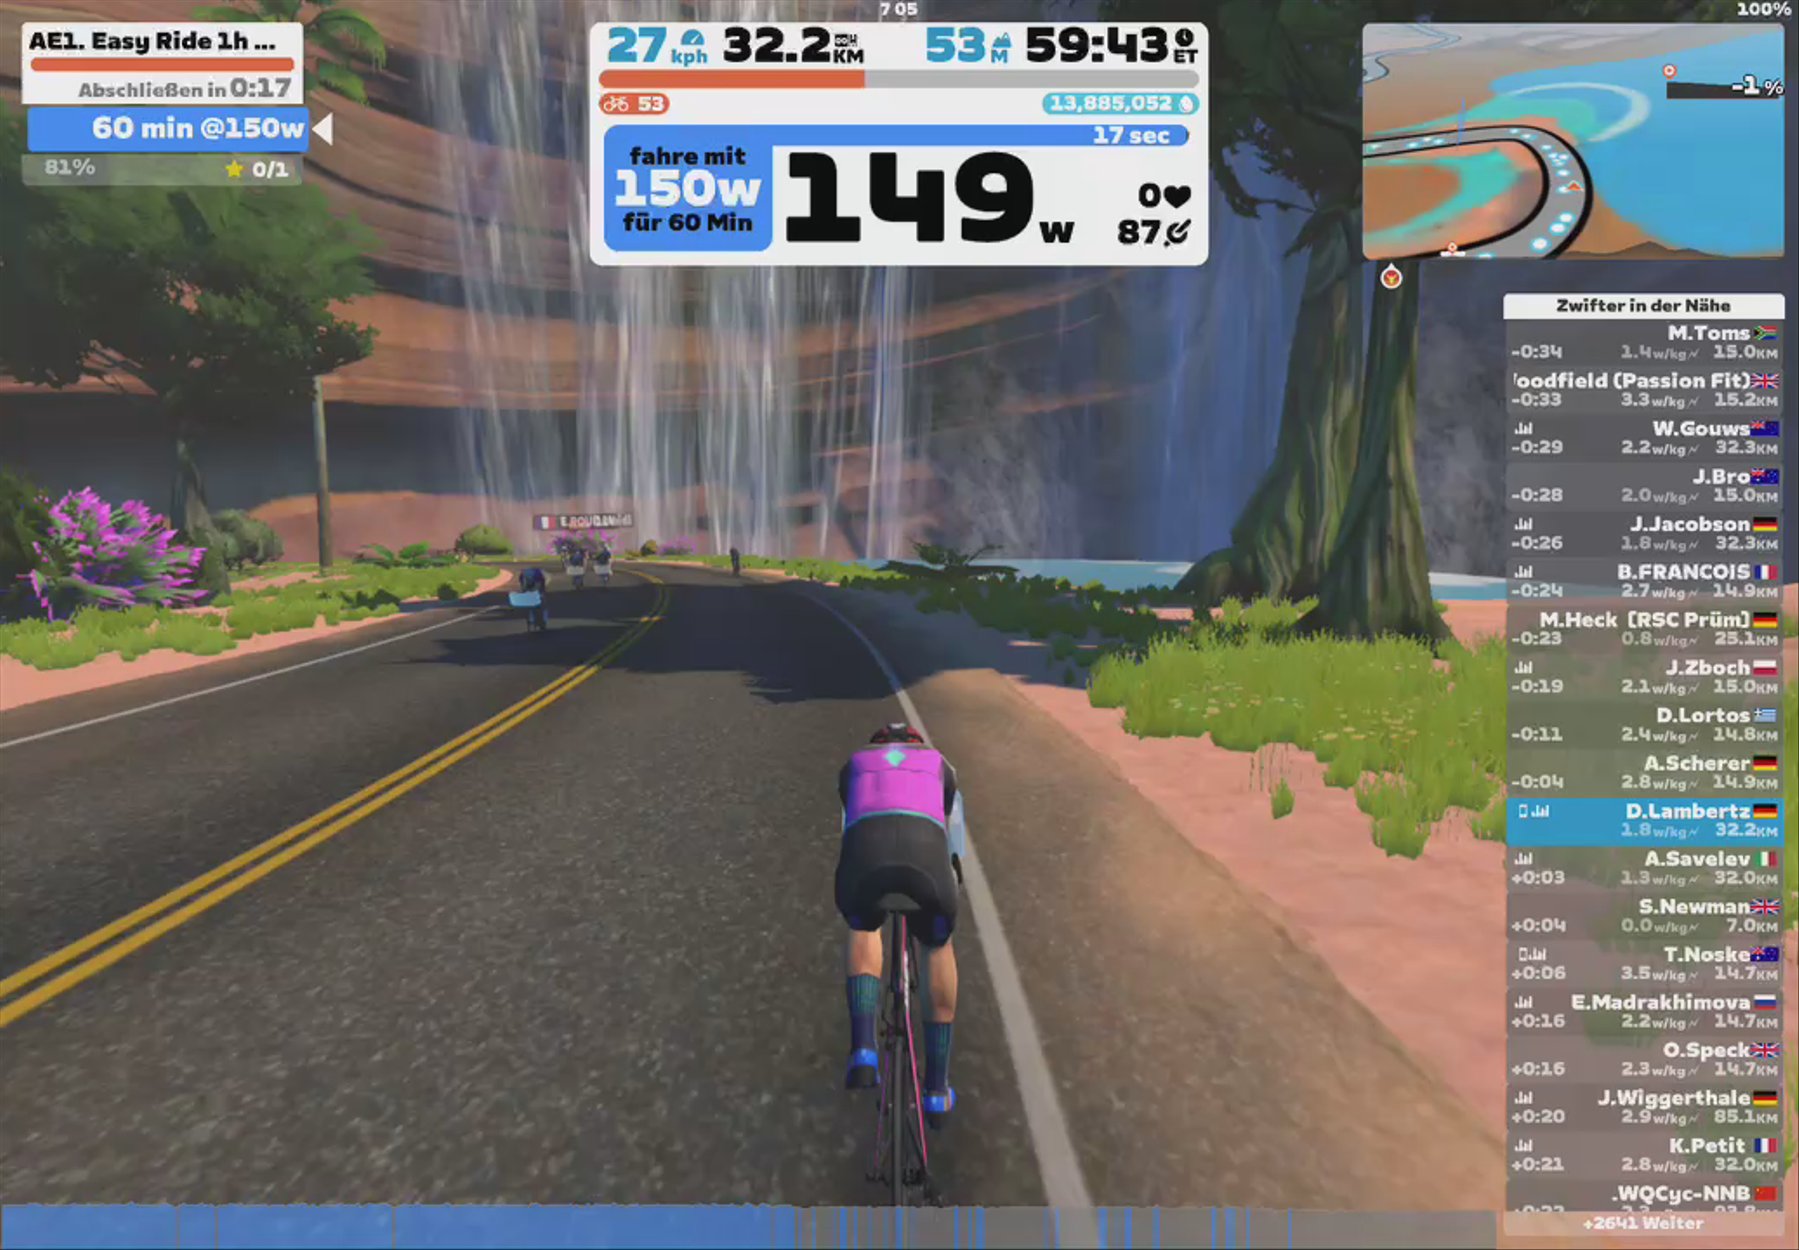 Zwift - AE1. Easy Ride 1h power.. in Watopia